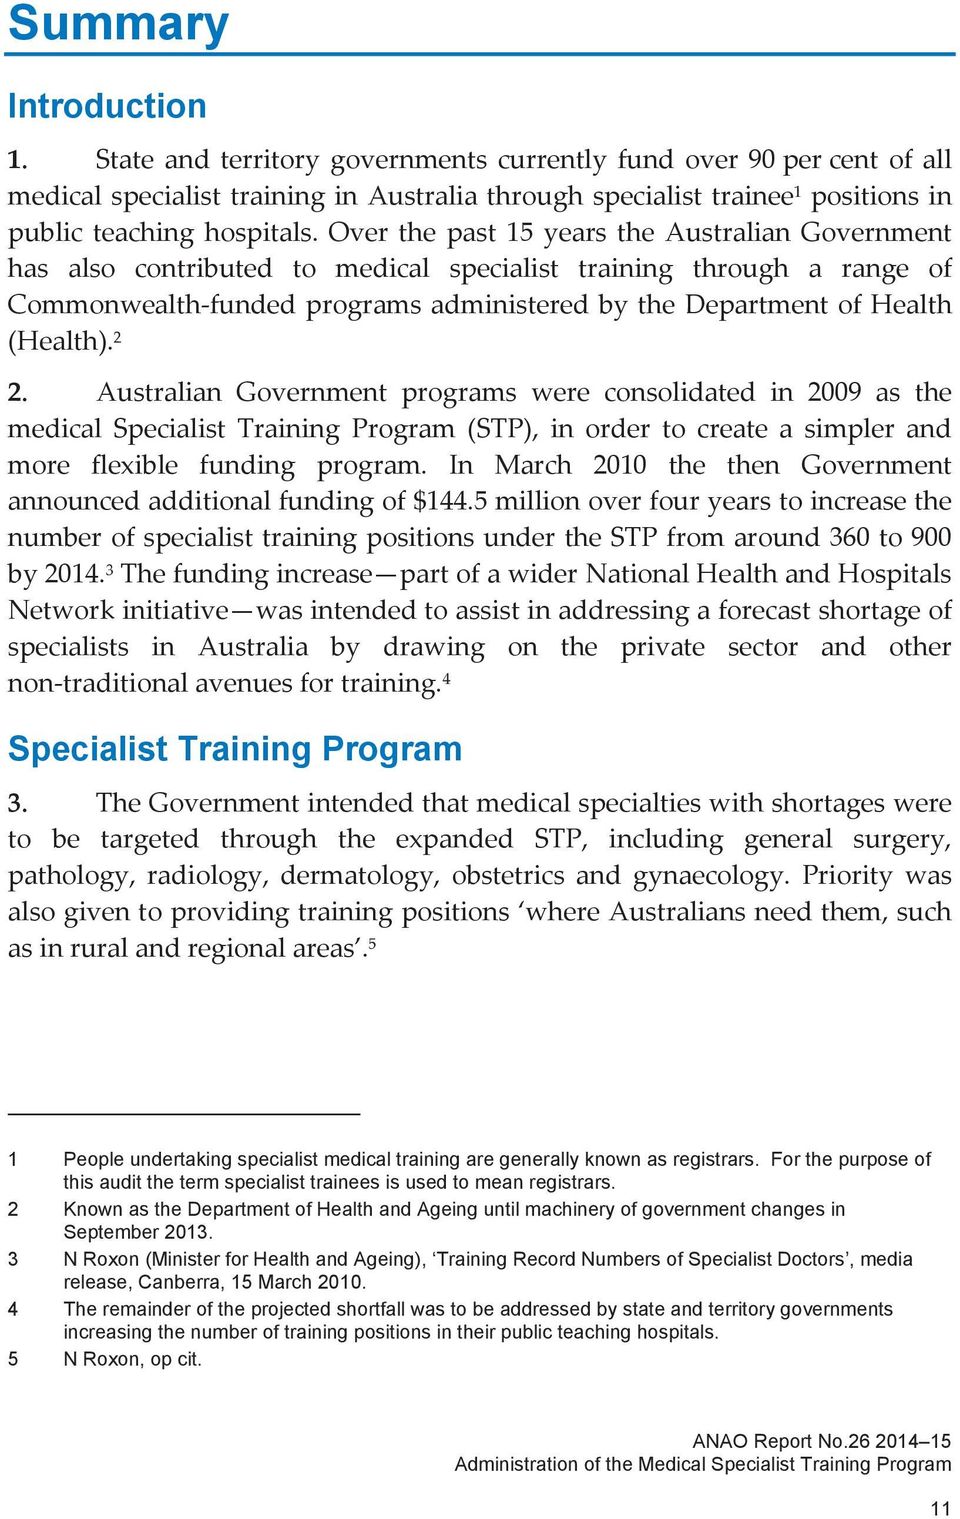 Over the past 15 years the Australian Government has also contributed to medical specialist training through a range of Commonwealth funded programs administered by the Department of Health (Health).